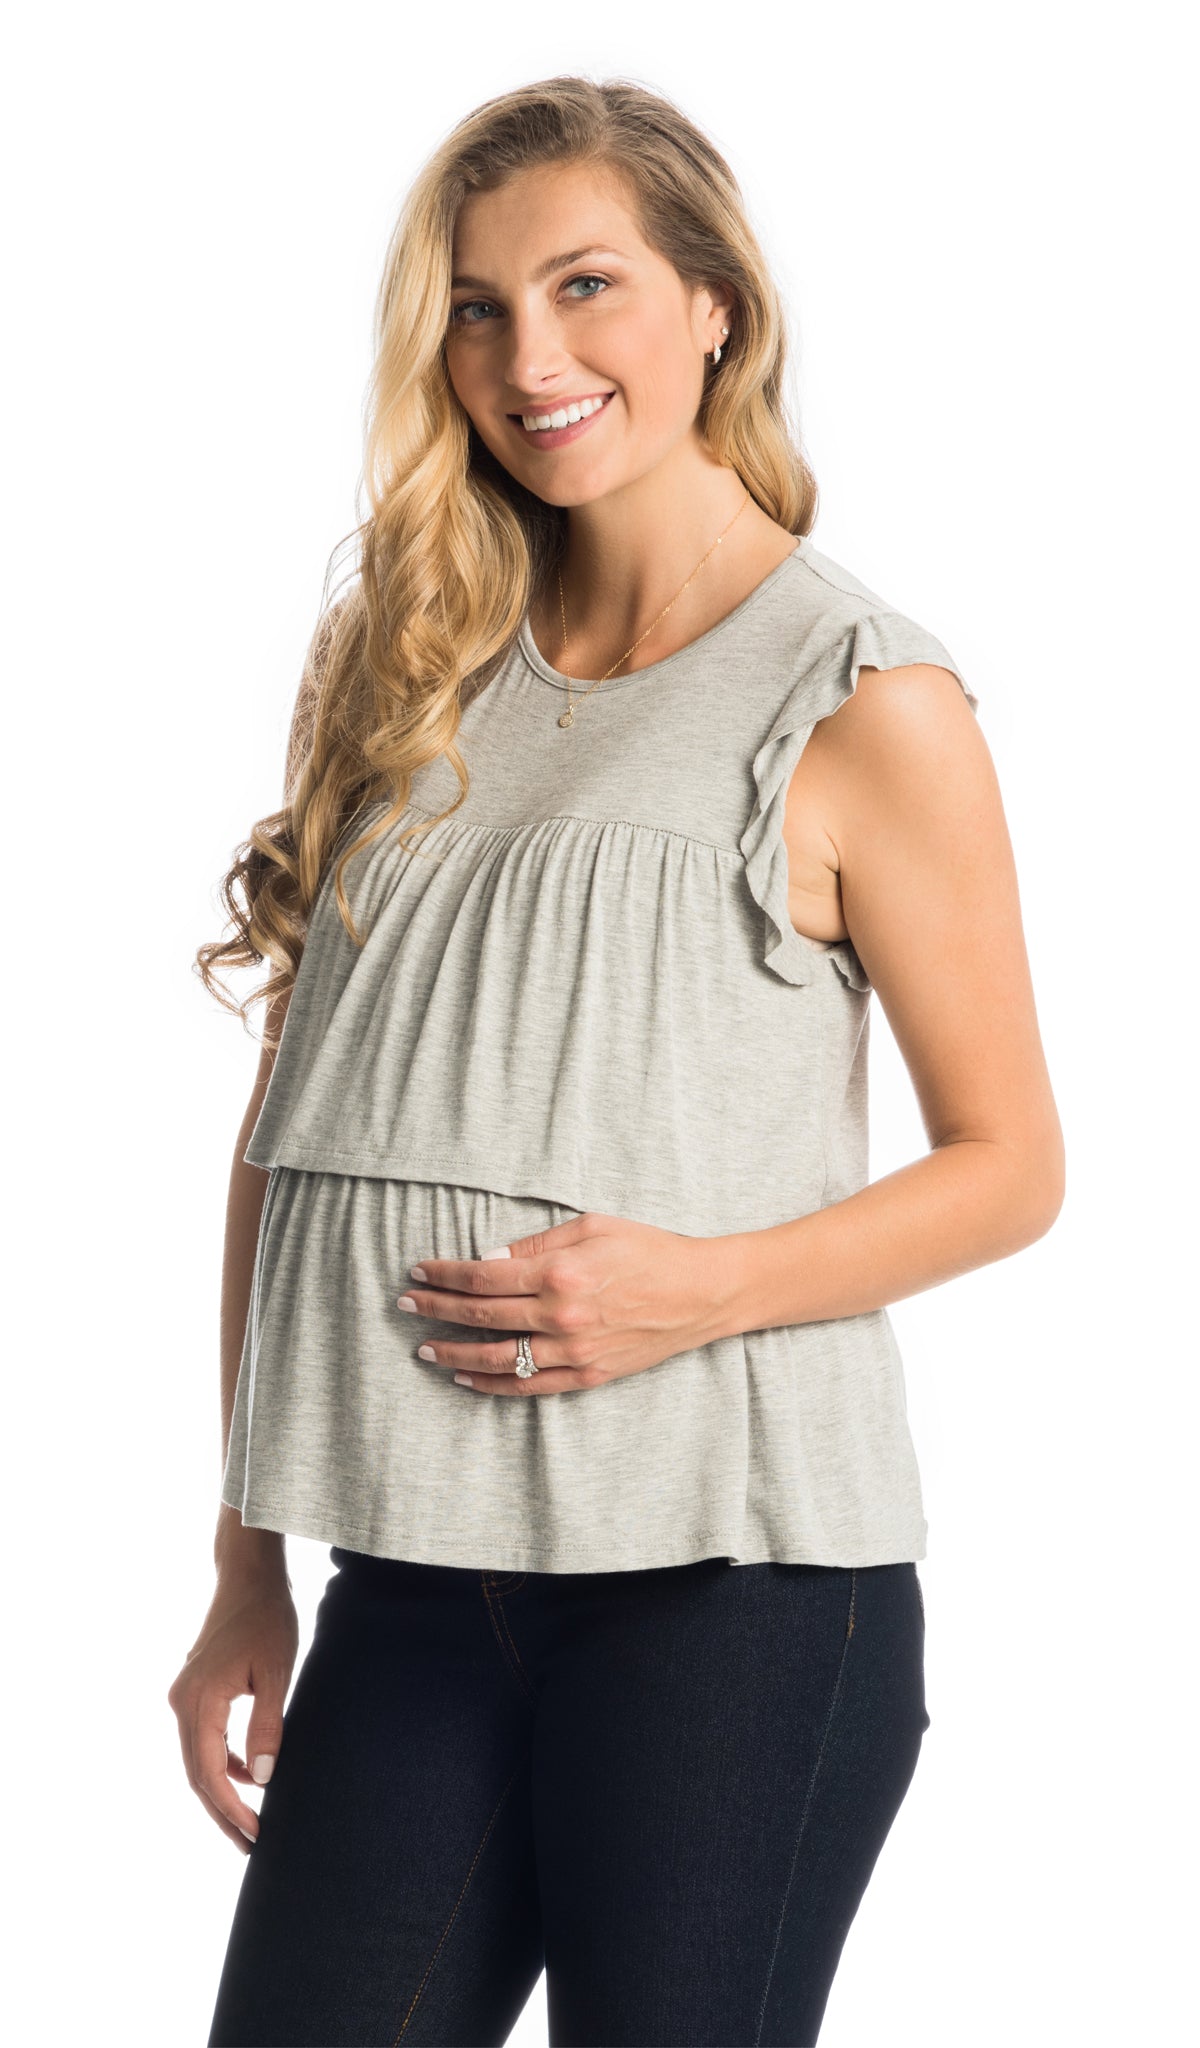 Heather Grey Valentina top worn in cropped shot by pregnant woman with dark denim with one hand on her belly.